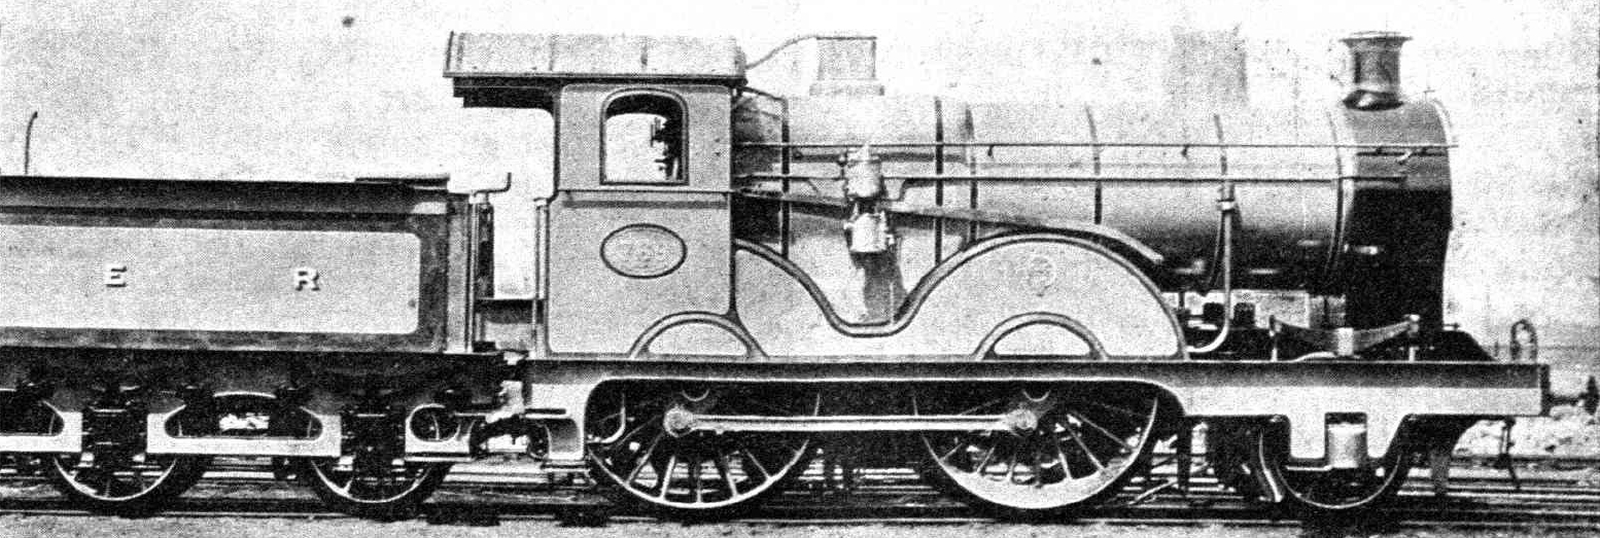 Conversion with larger boiler and new cab